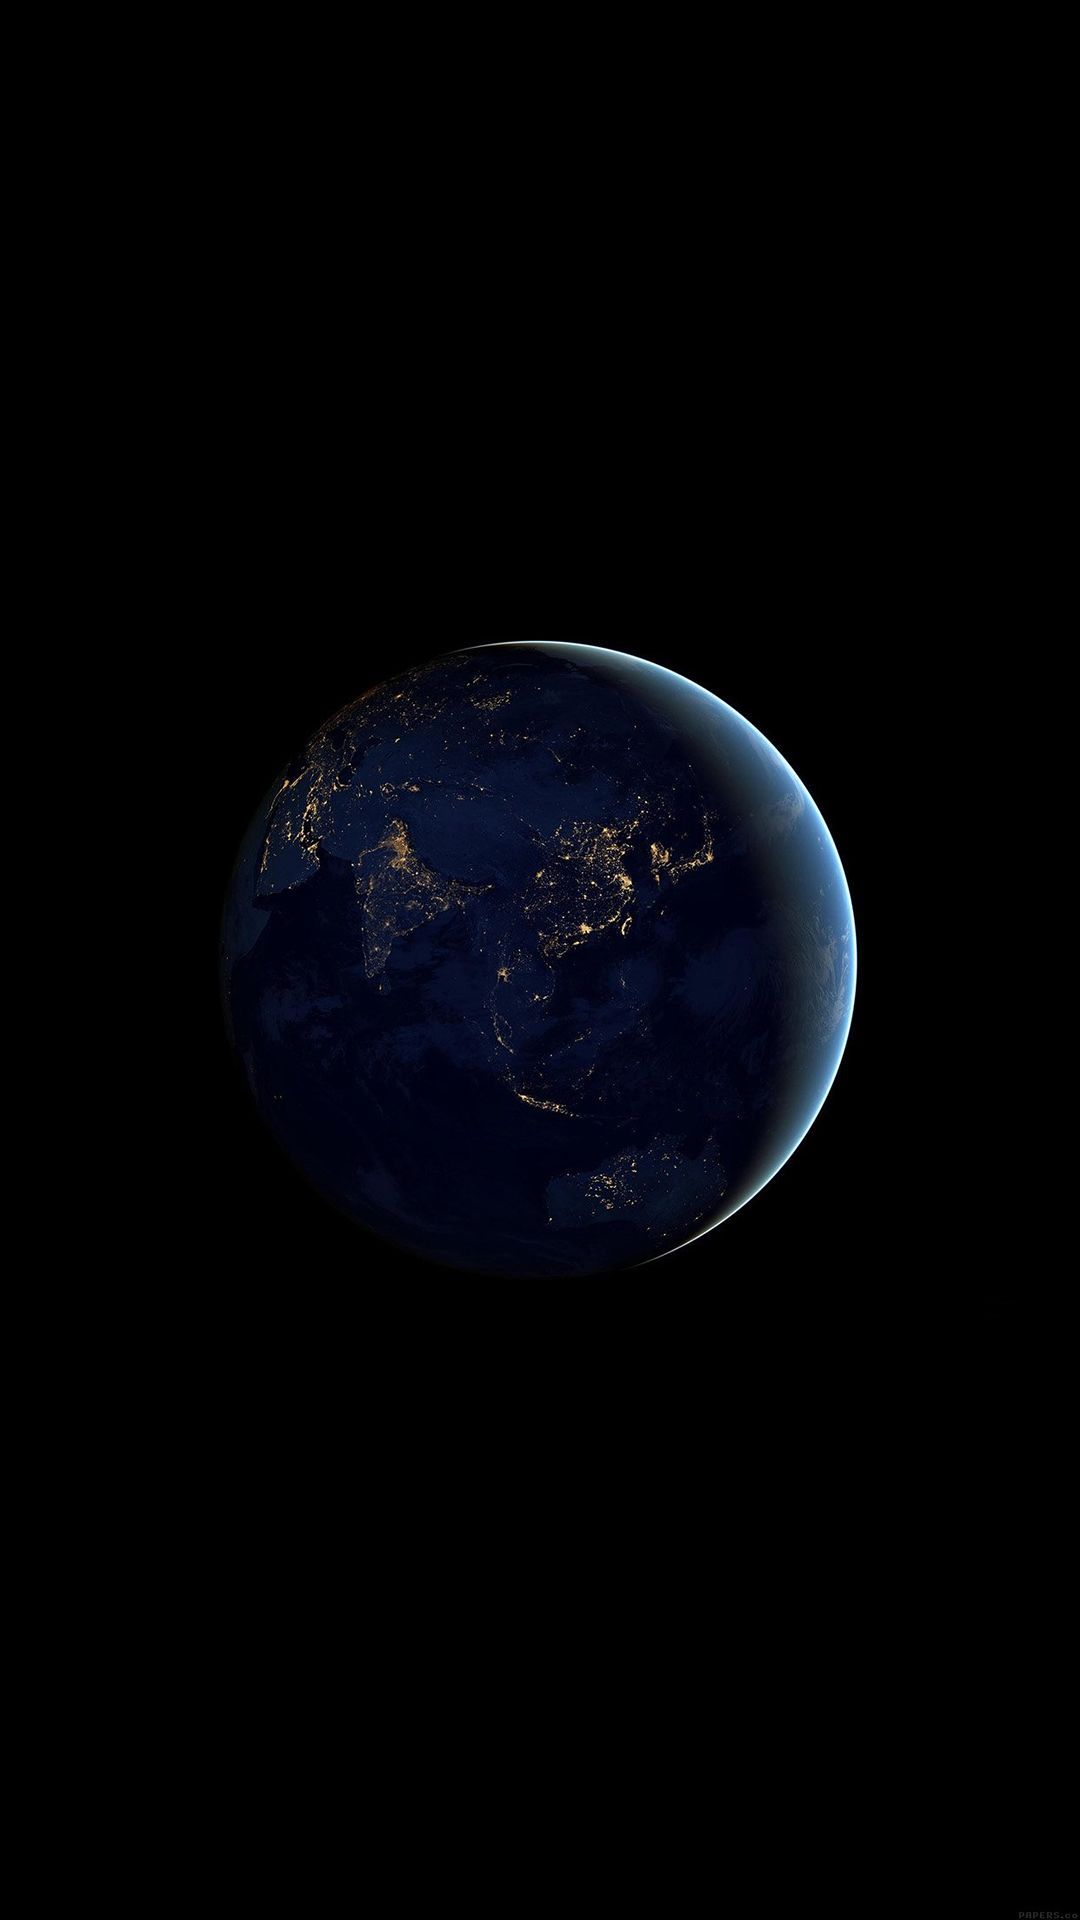 Asia At Night Earth Space Dark iPhone 6 Wallpaper Download. iPhone Wallpaper, iPad wallpaper. iPhone wallpaper earth, Wallpaper earth, Android wallpaper black